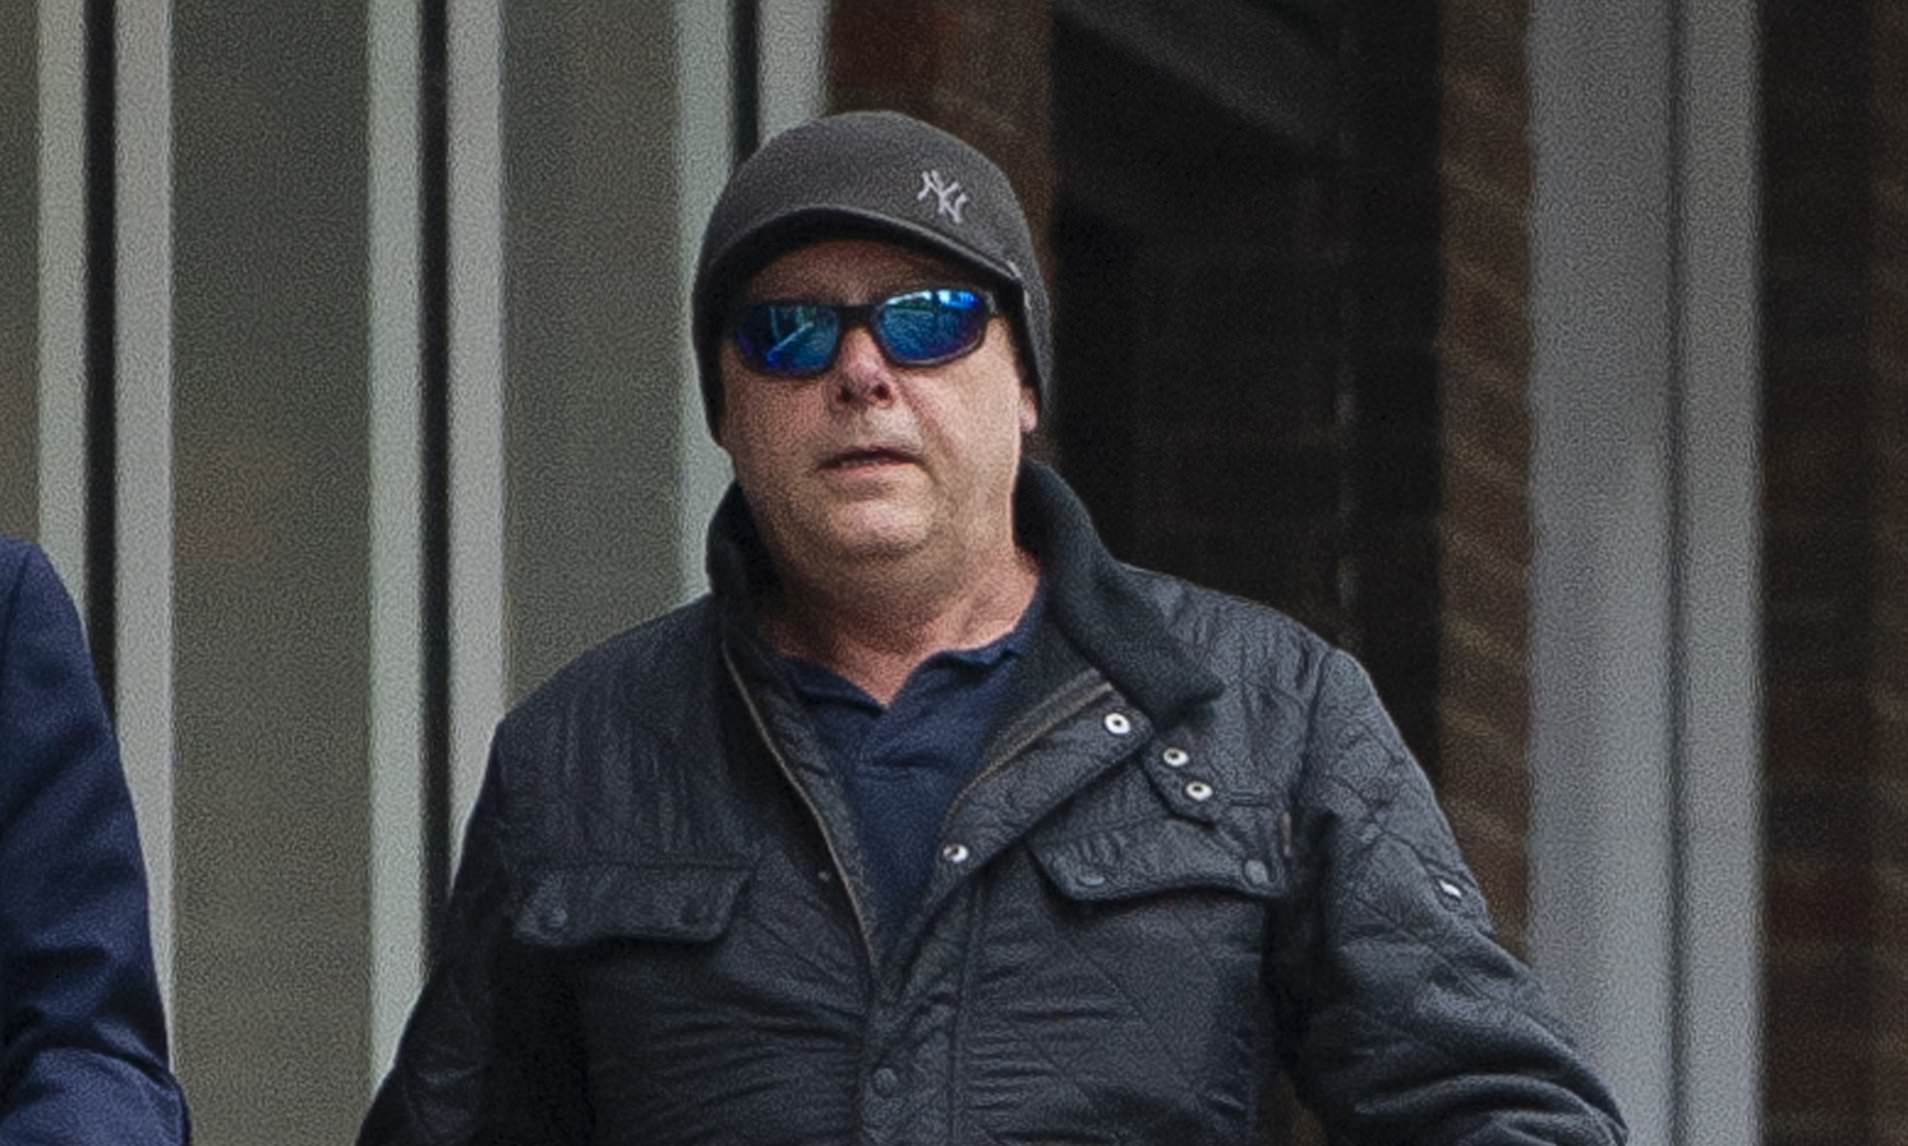 UK Lottery Fraudster to Cough Up £1M or Face Six More Years in Prison